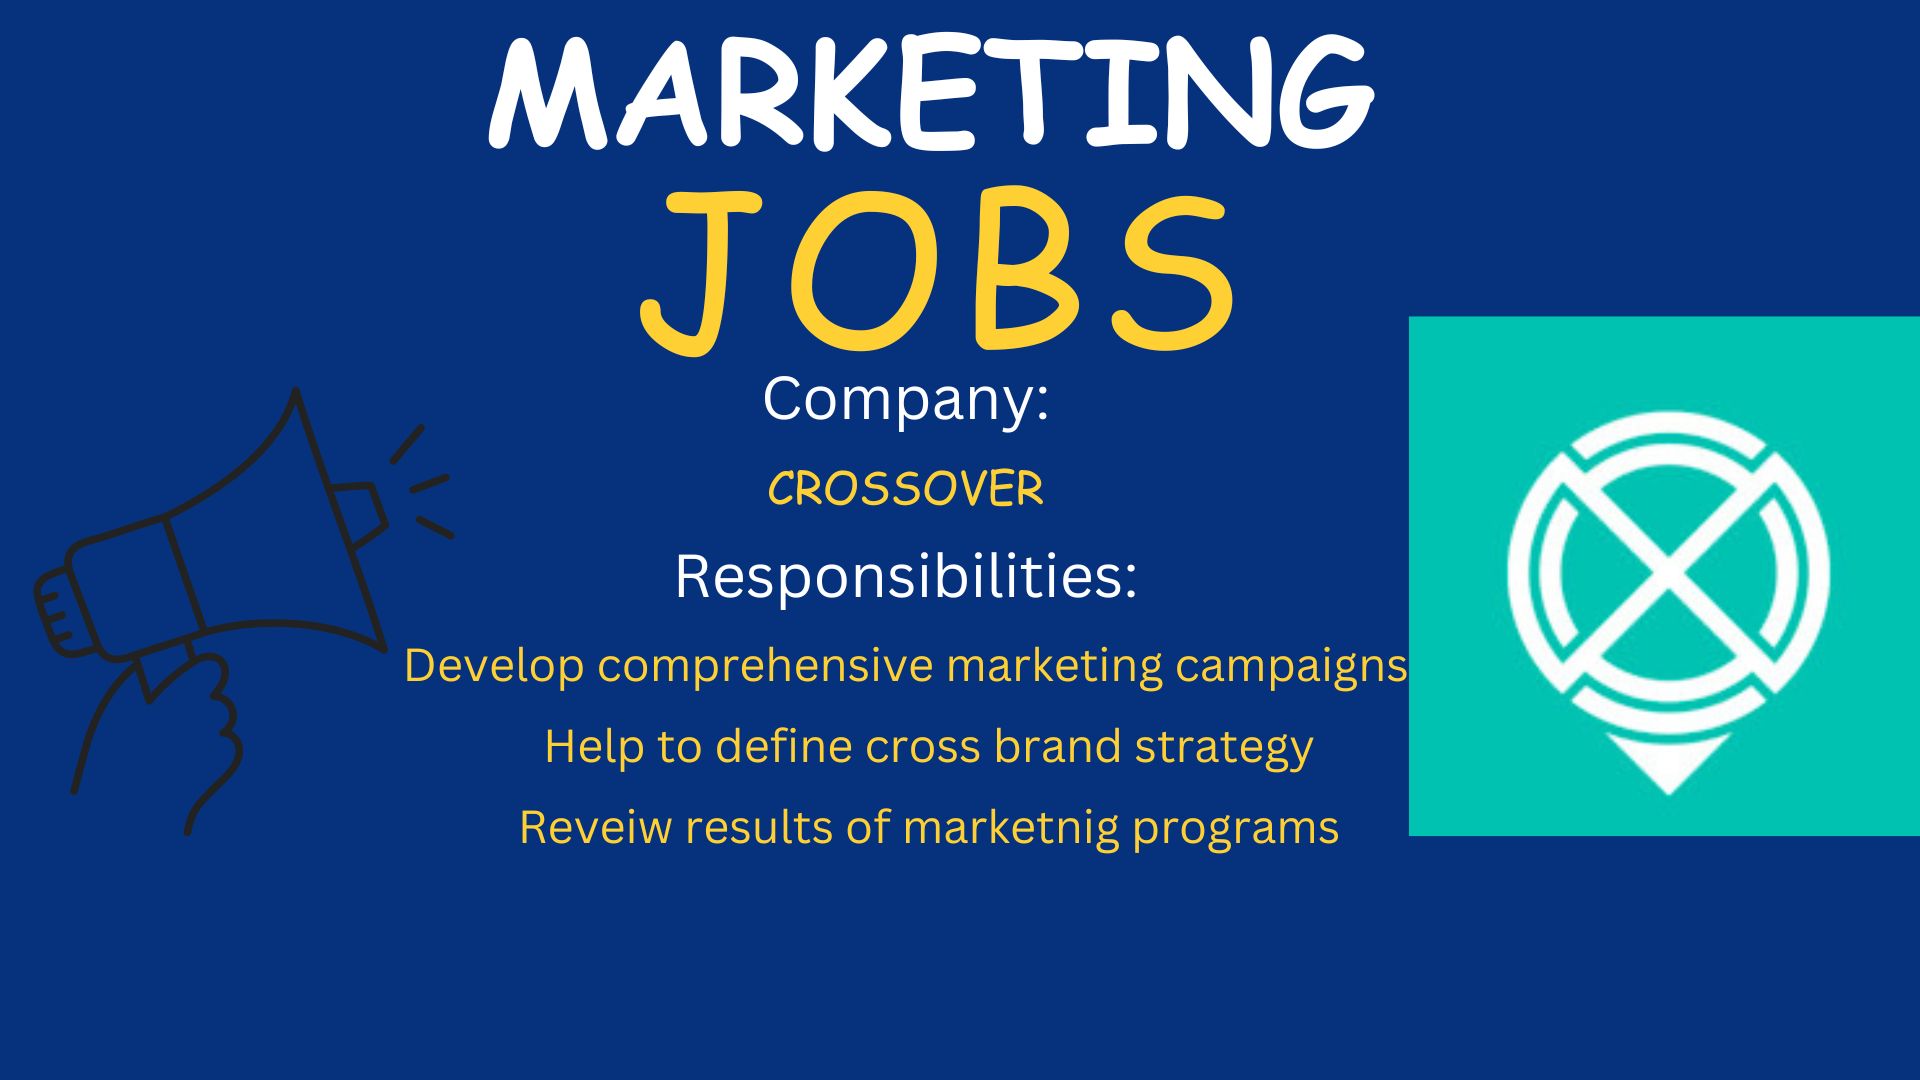 Marketing Manager, IgniteTech (Remote) – $100,000/year USD